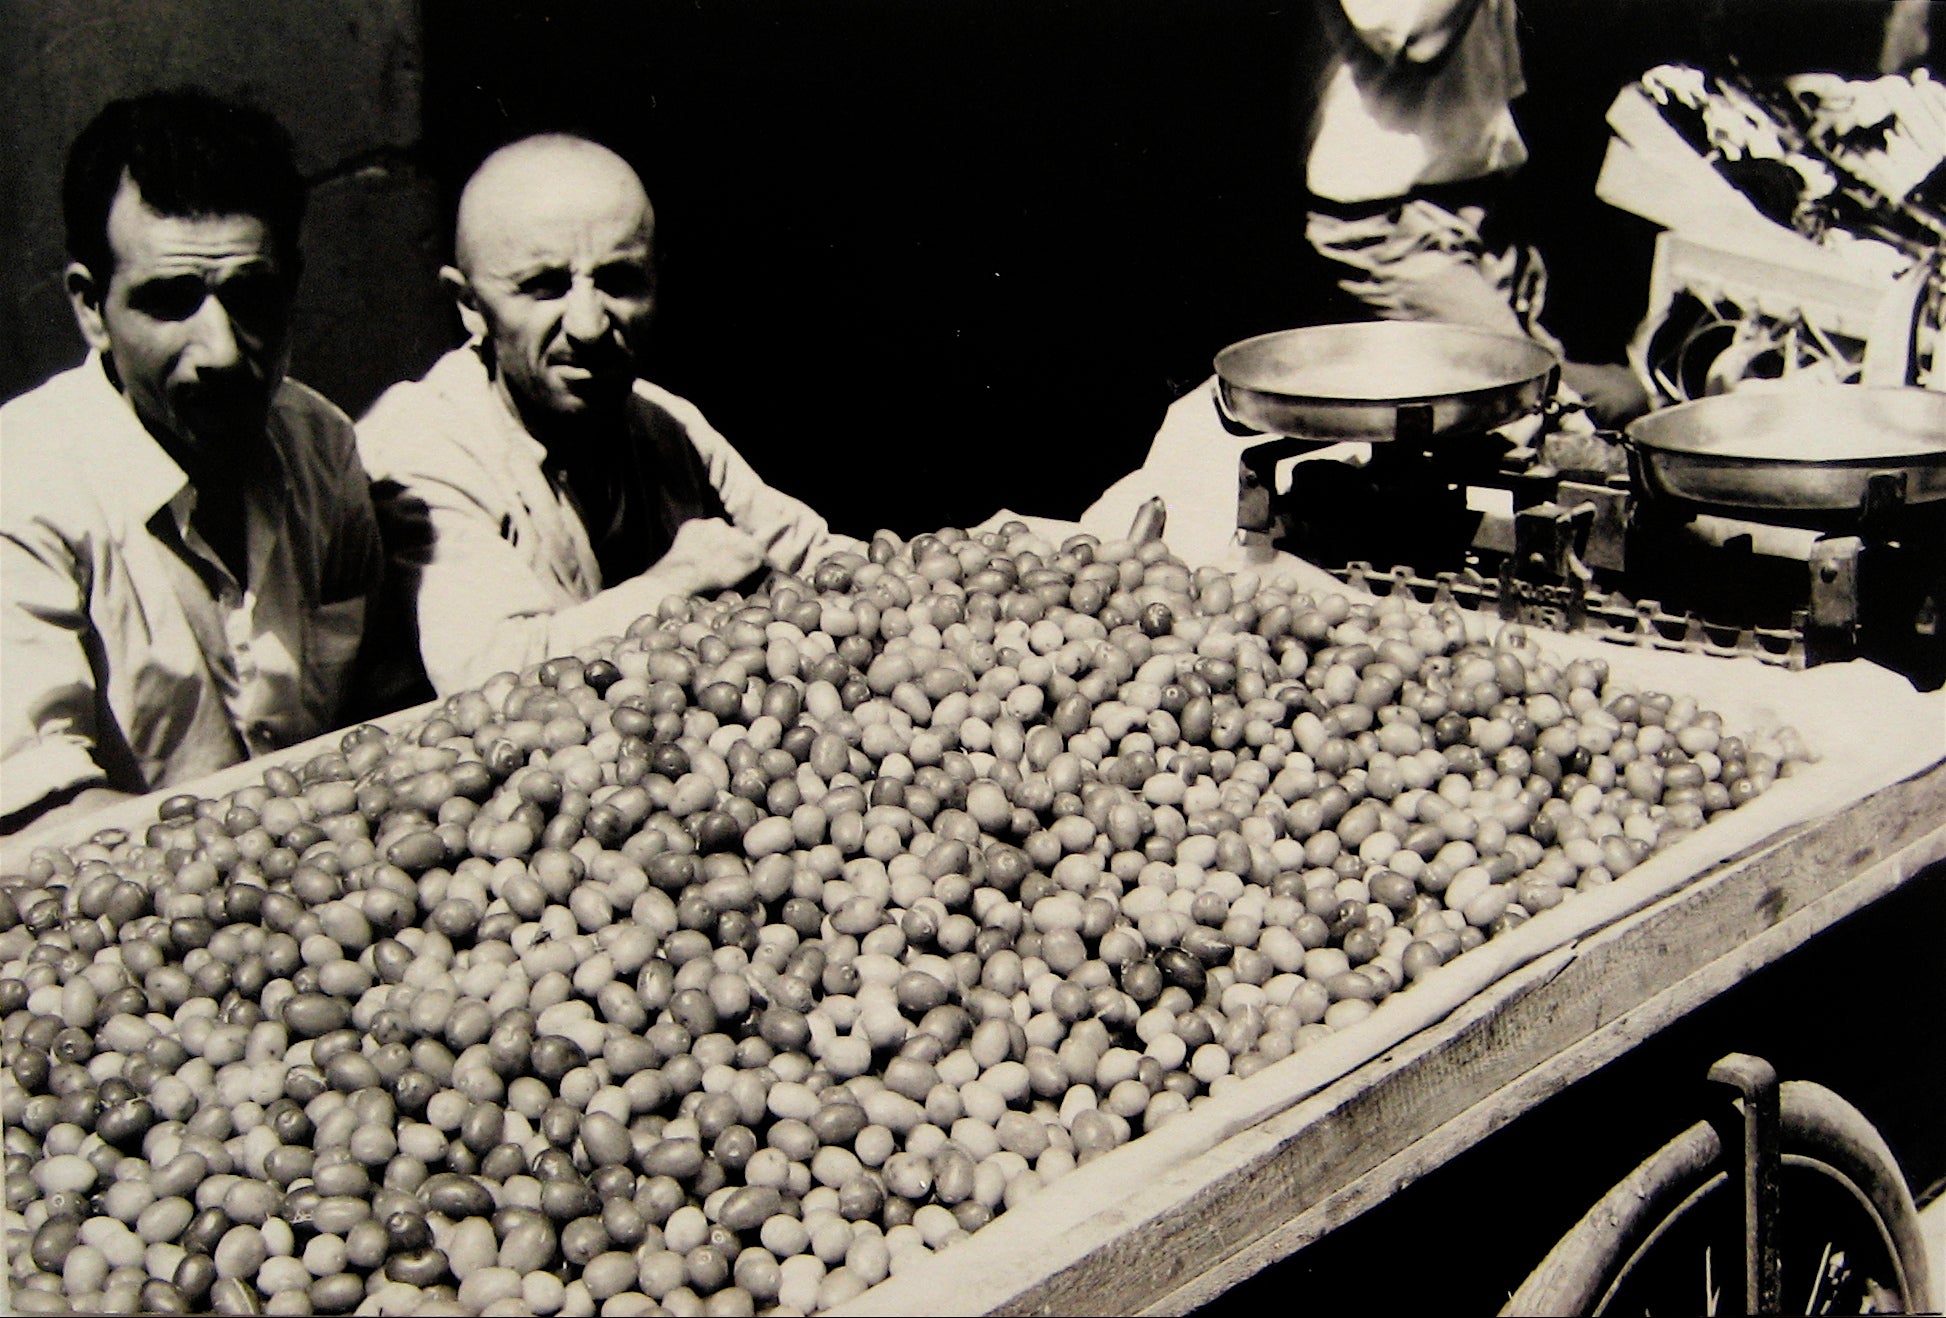 Roasting Chestnuts <br>1960s Photograph <br><br>#16233